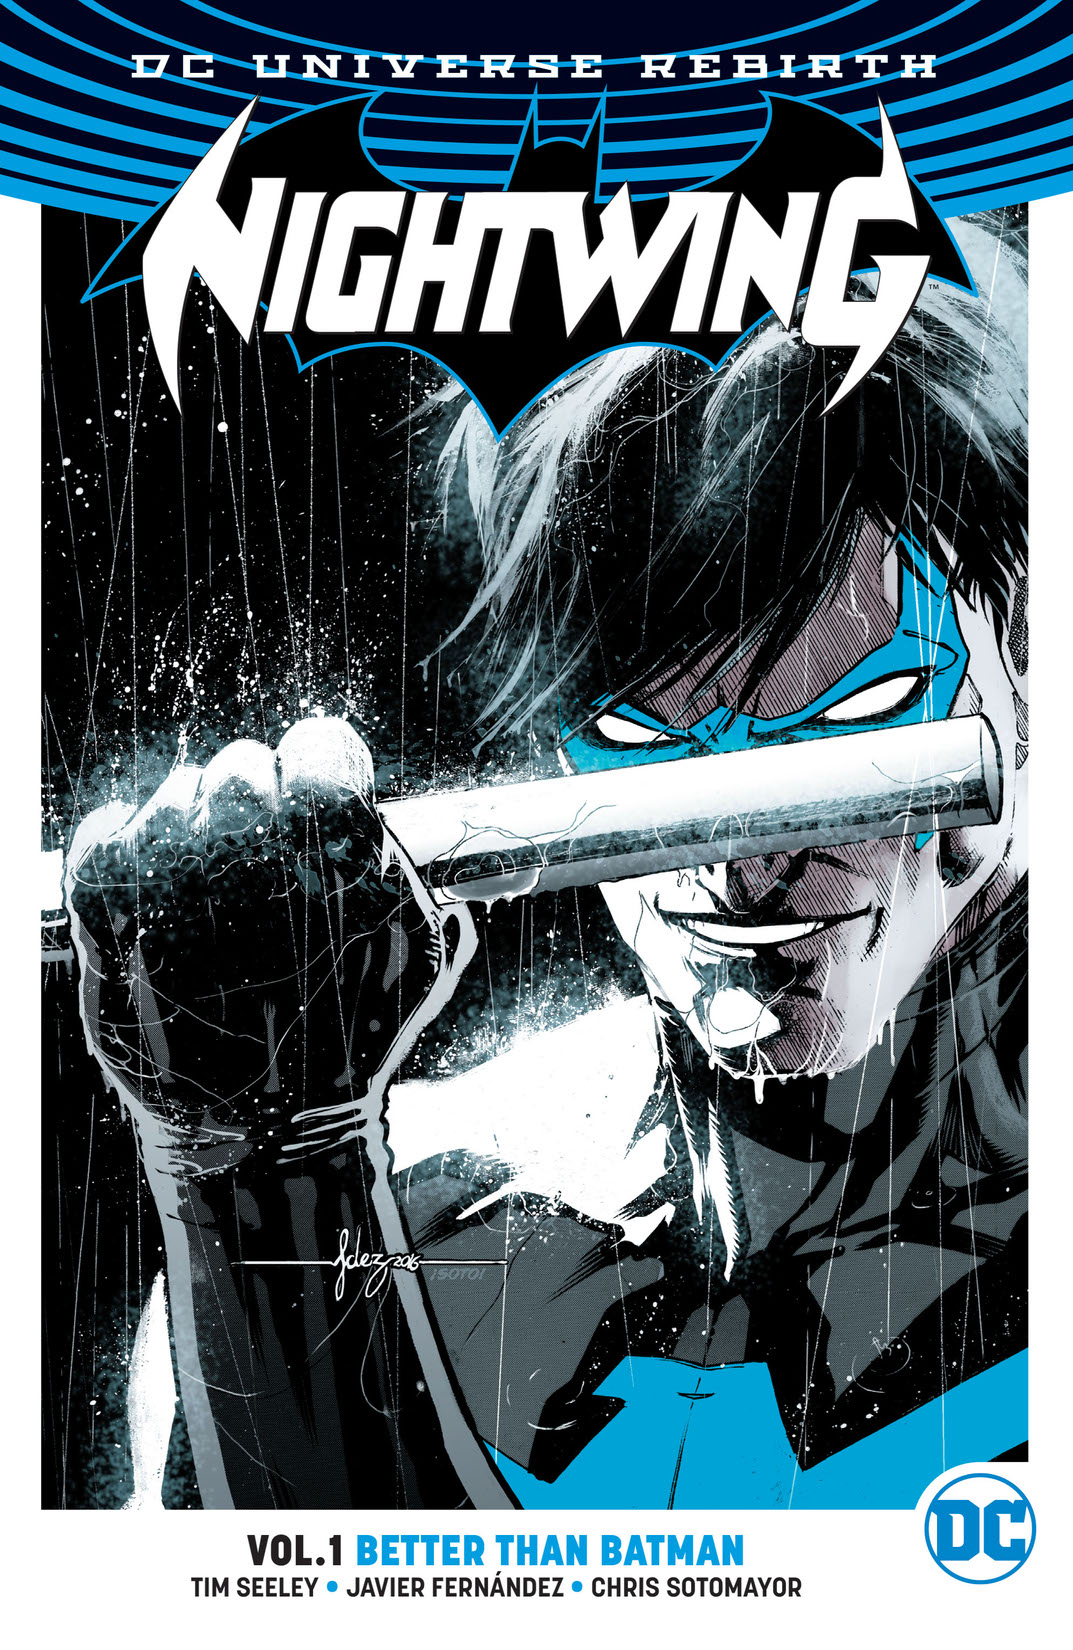 Nightwing Vol. 1: Better Than Batman preview images